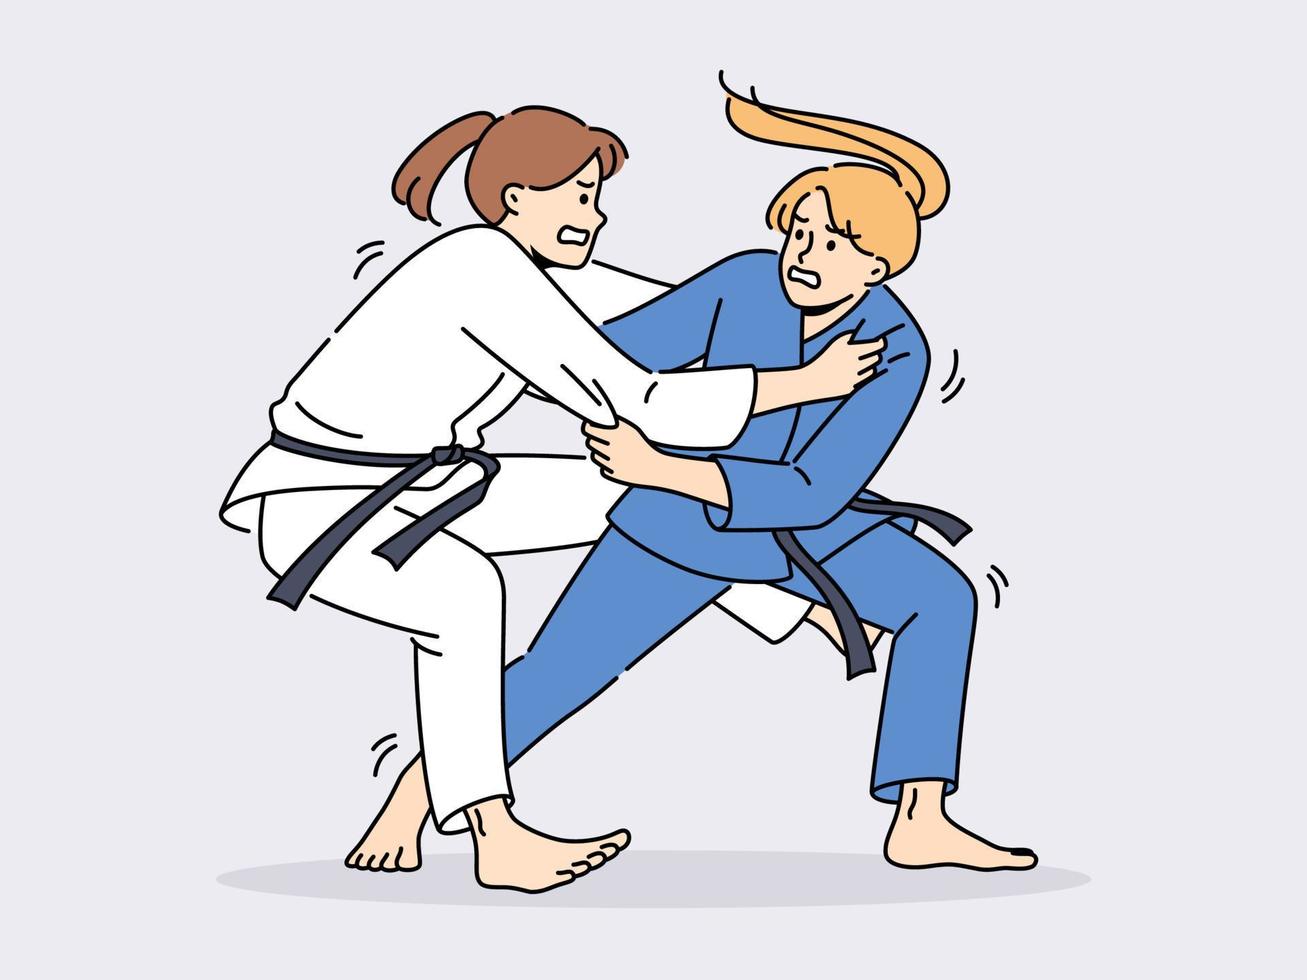 Women in karate kimonos fighting on ring. Female athletes in uniform involved in martial arts. Sport and competition. Vector illustration.